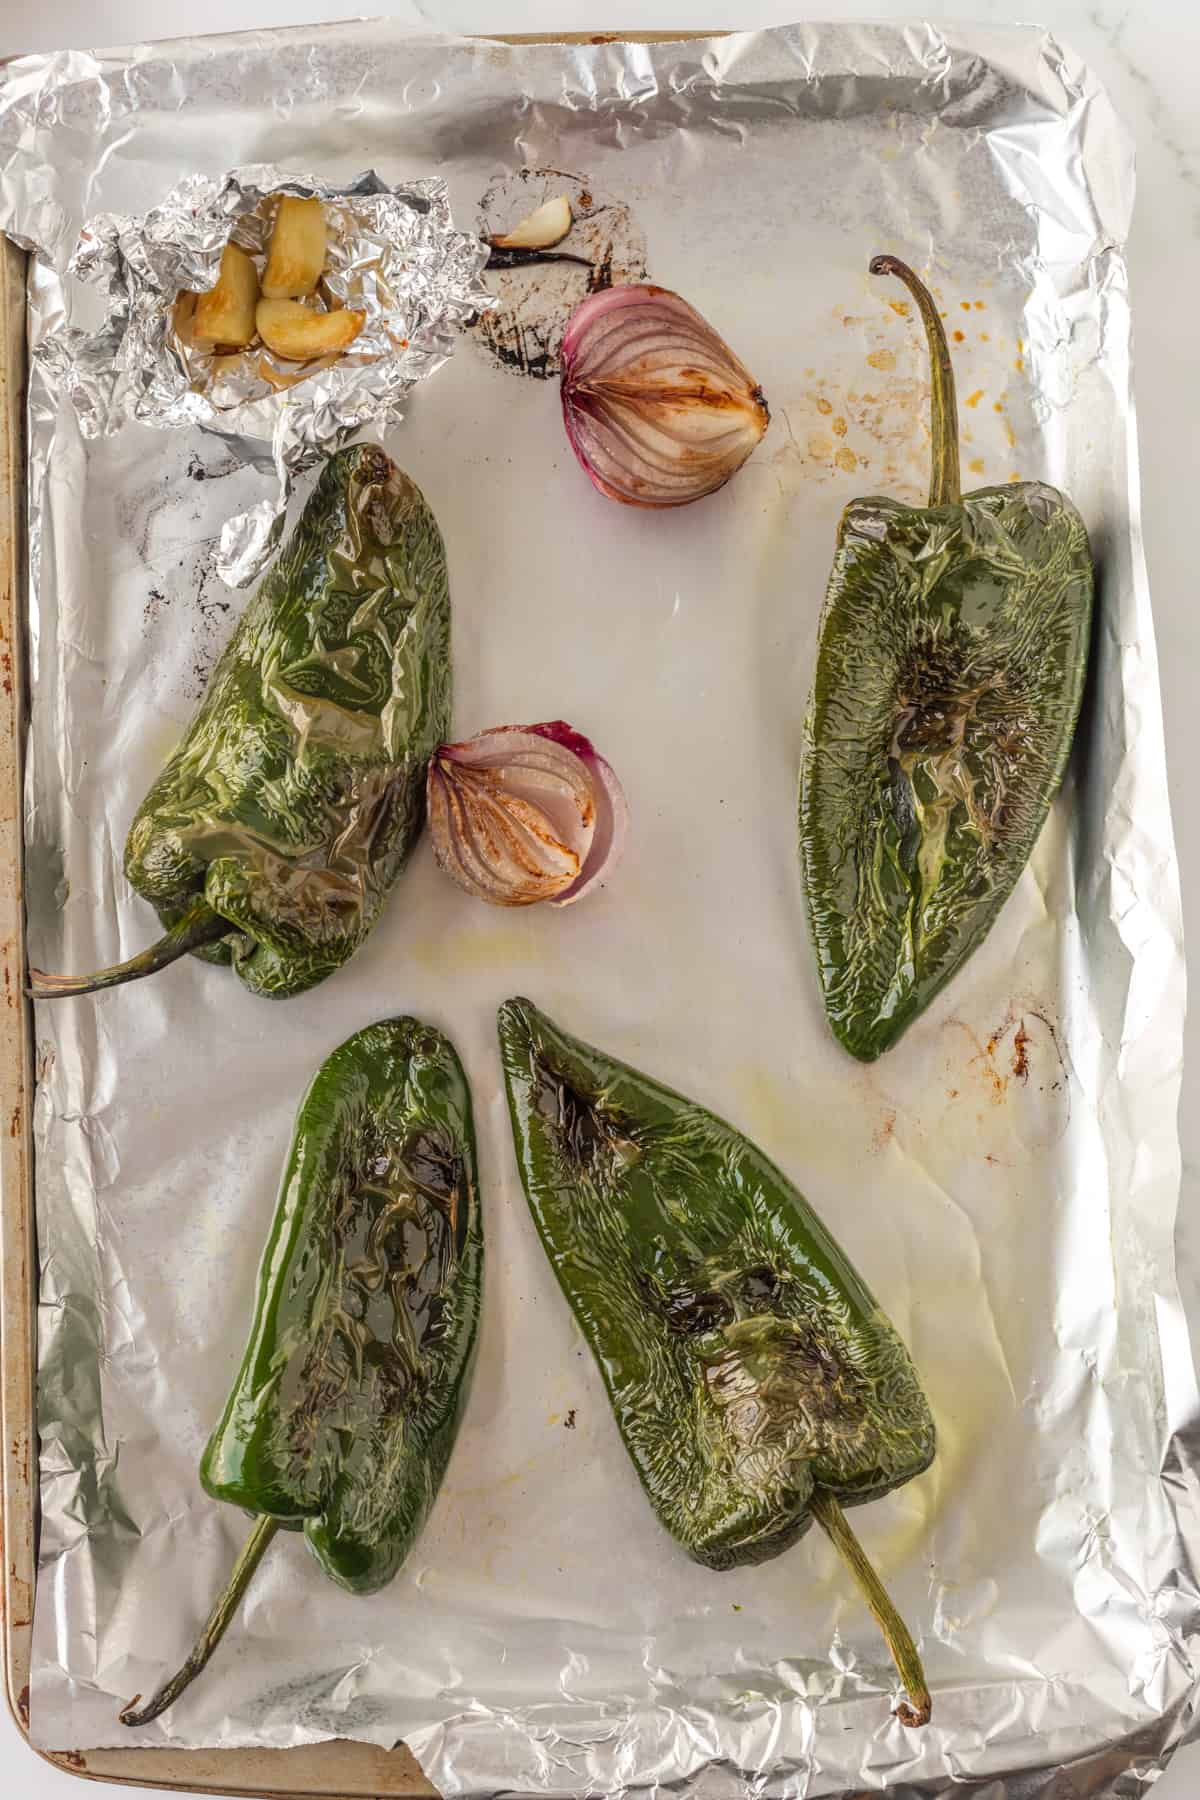 pepper, onion, and garlic on a sheet pan cooked.